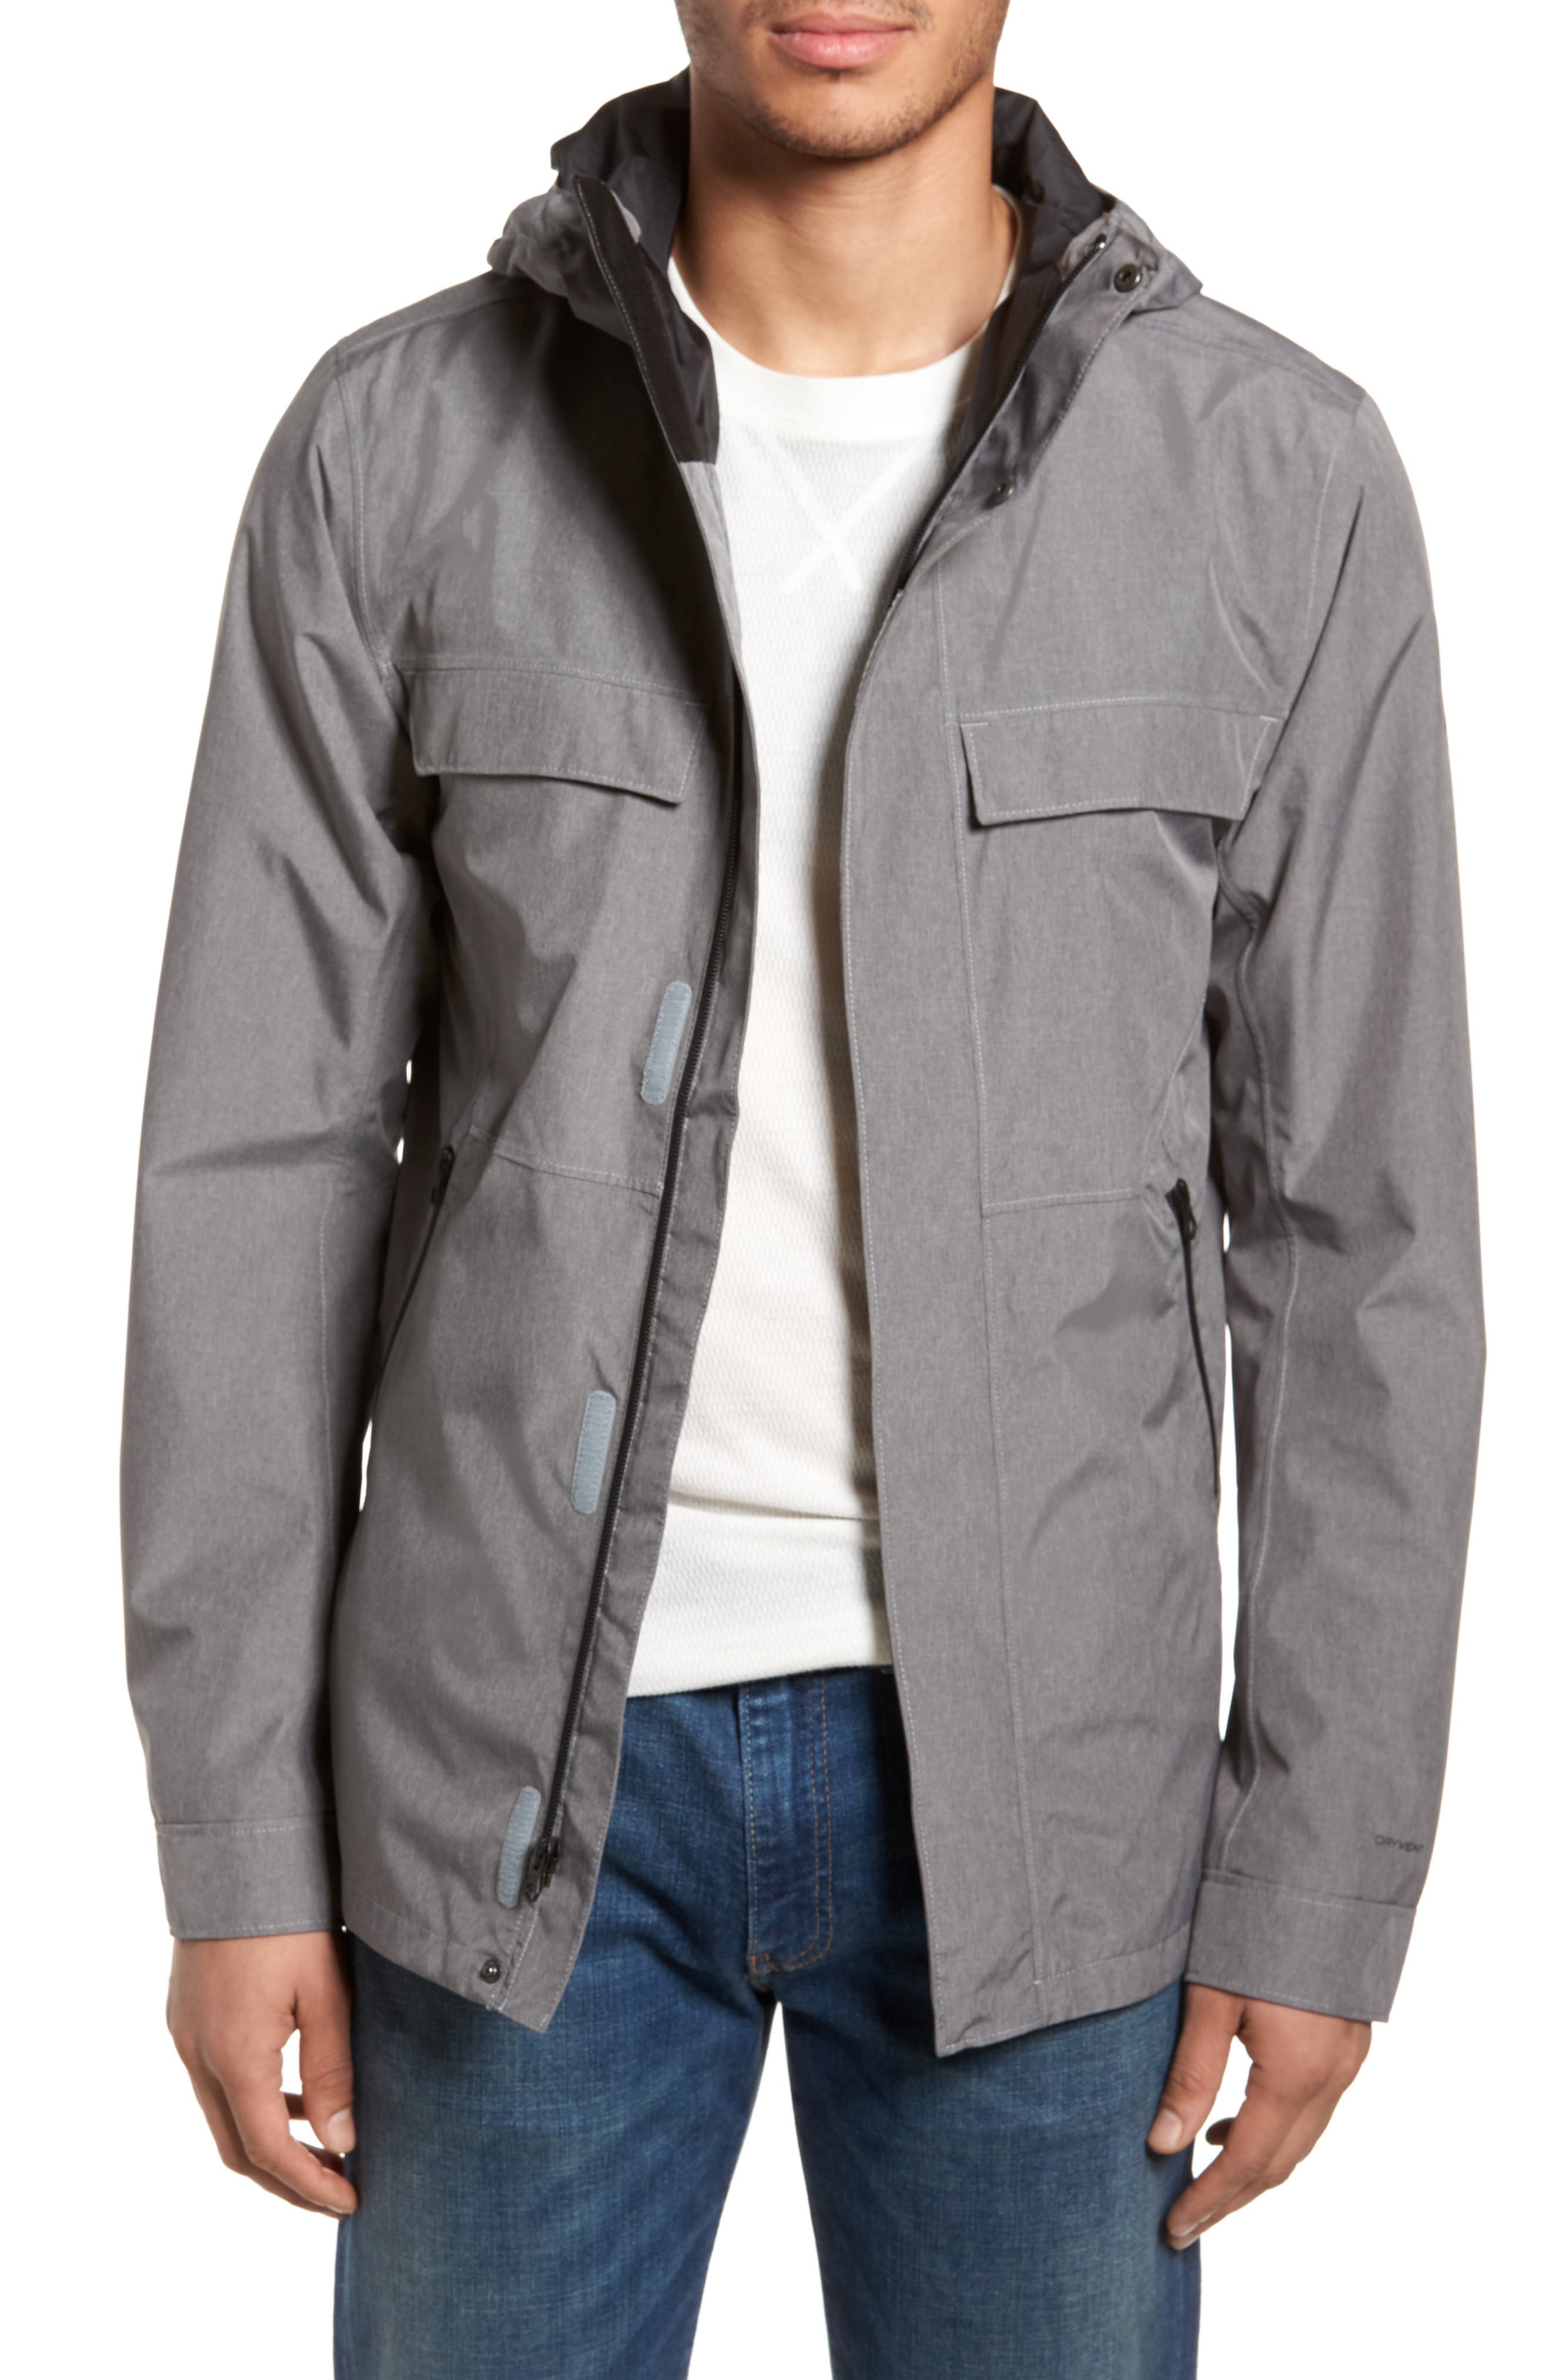 north face insulated jenison jacket